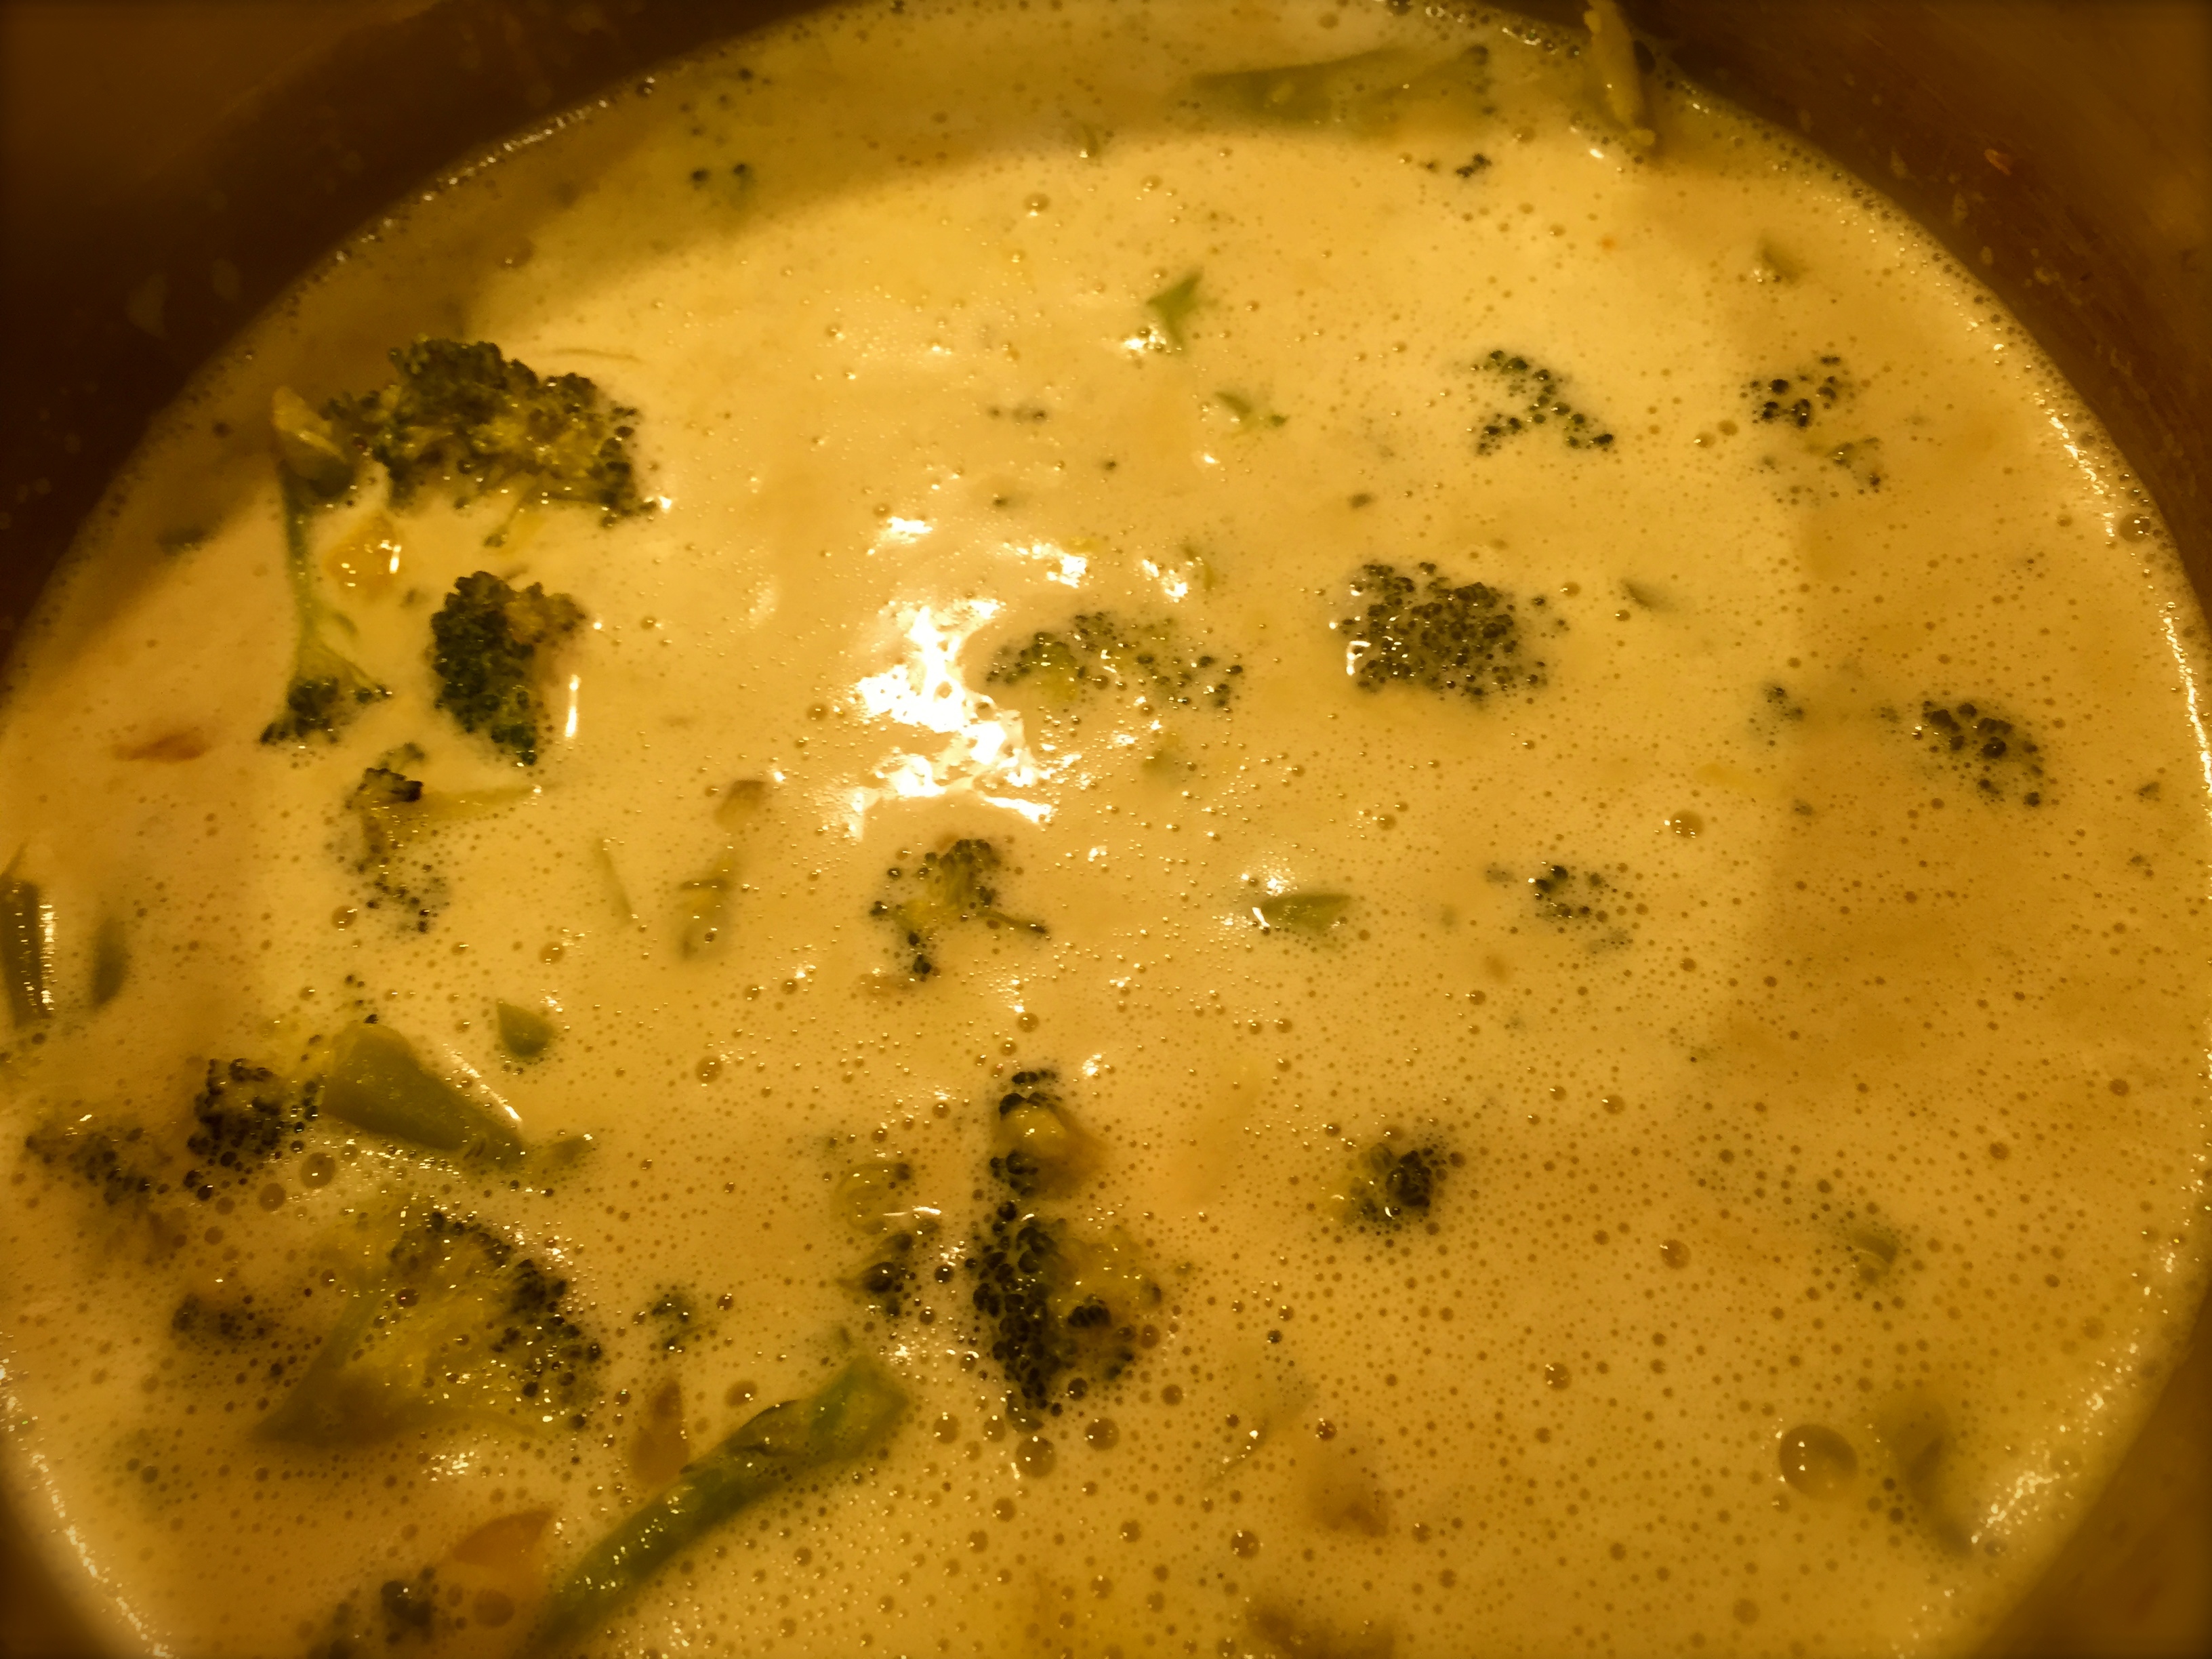 Tasty Tuesday … Vegan “Creamy Cheezy” Broccoli Soup | in cahoots with ...